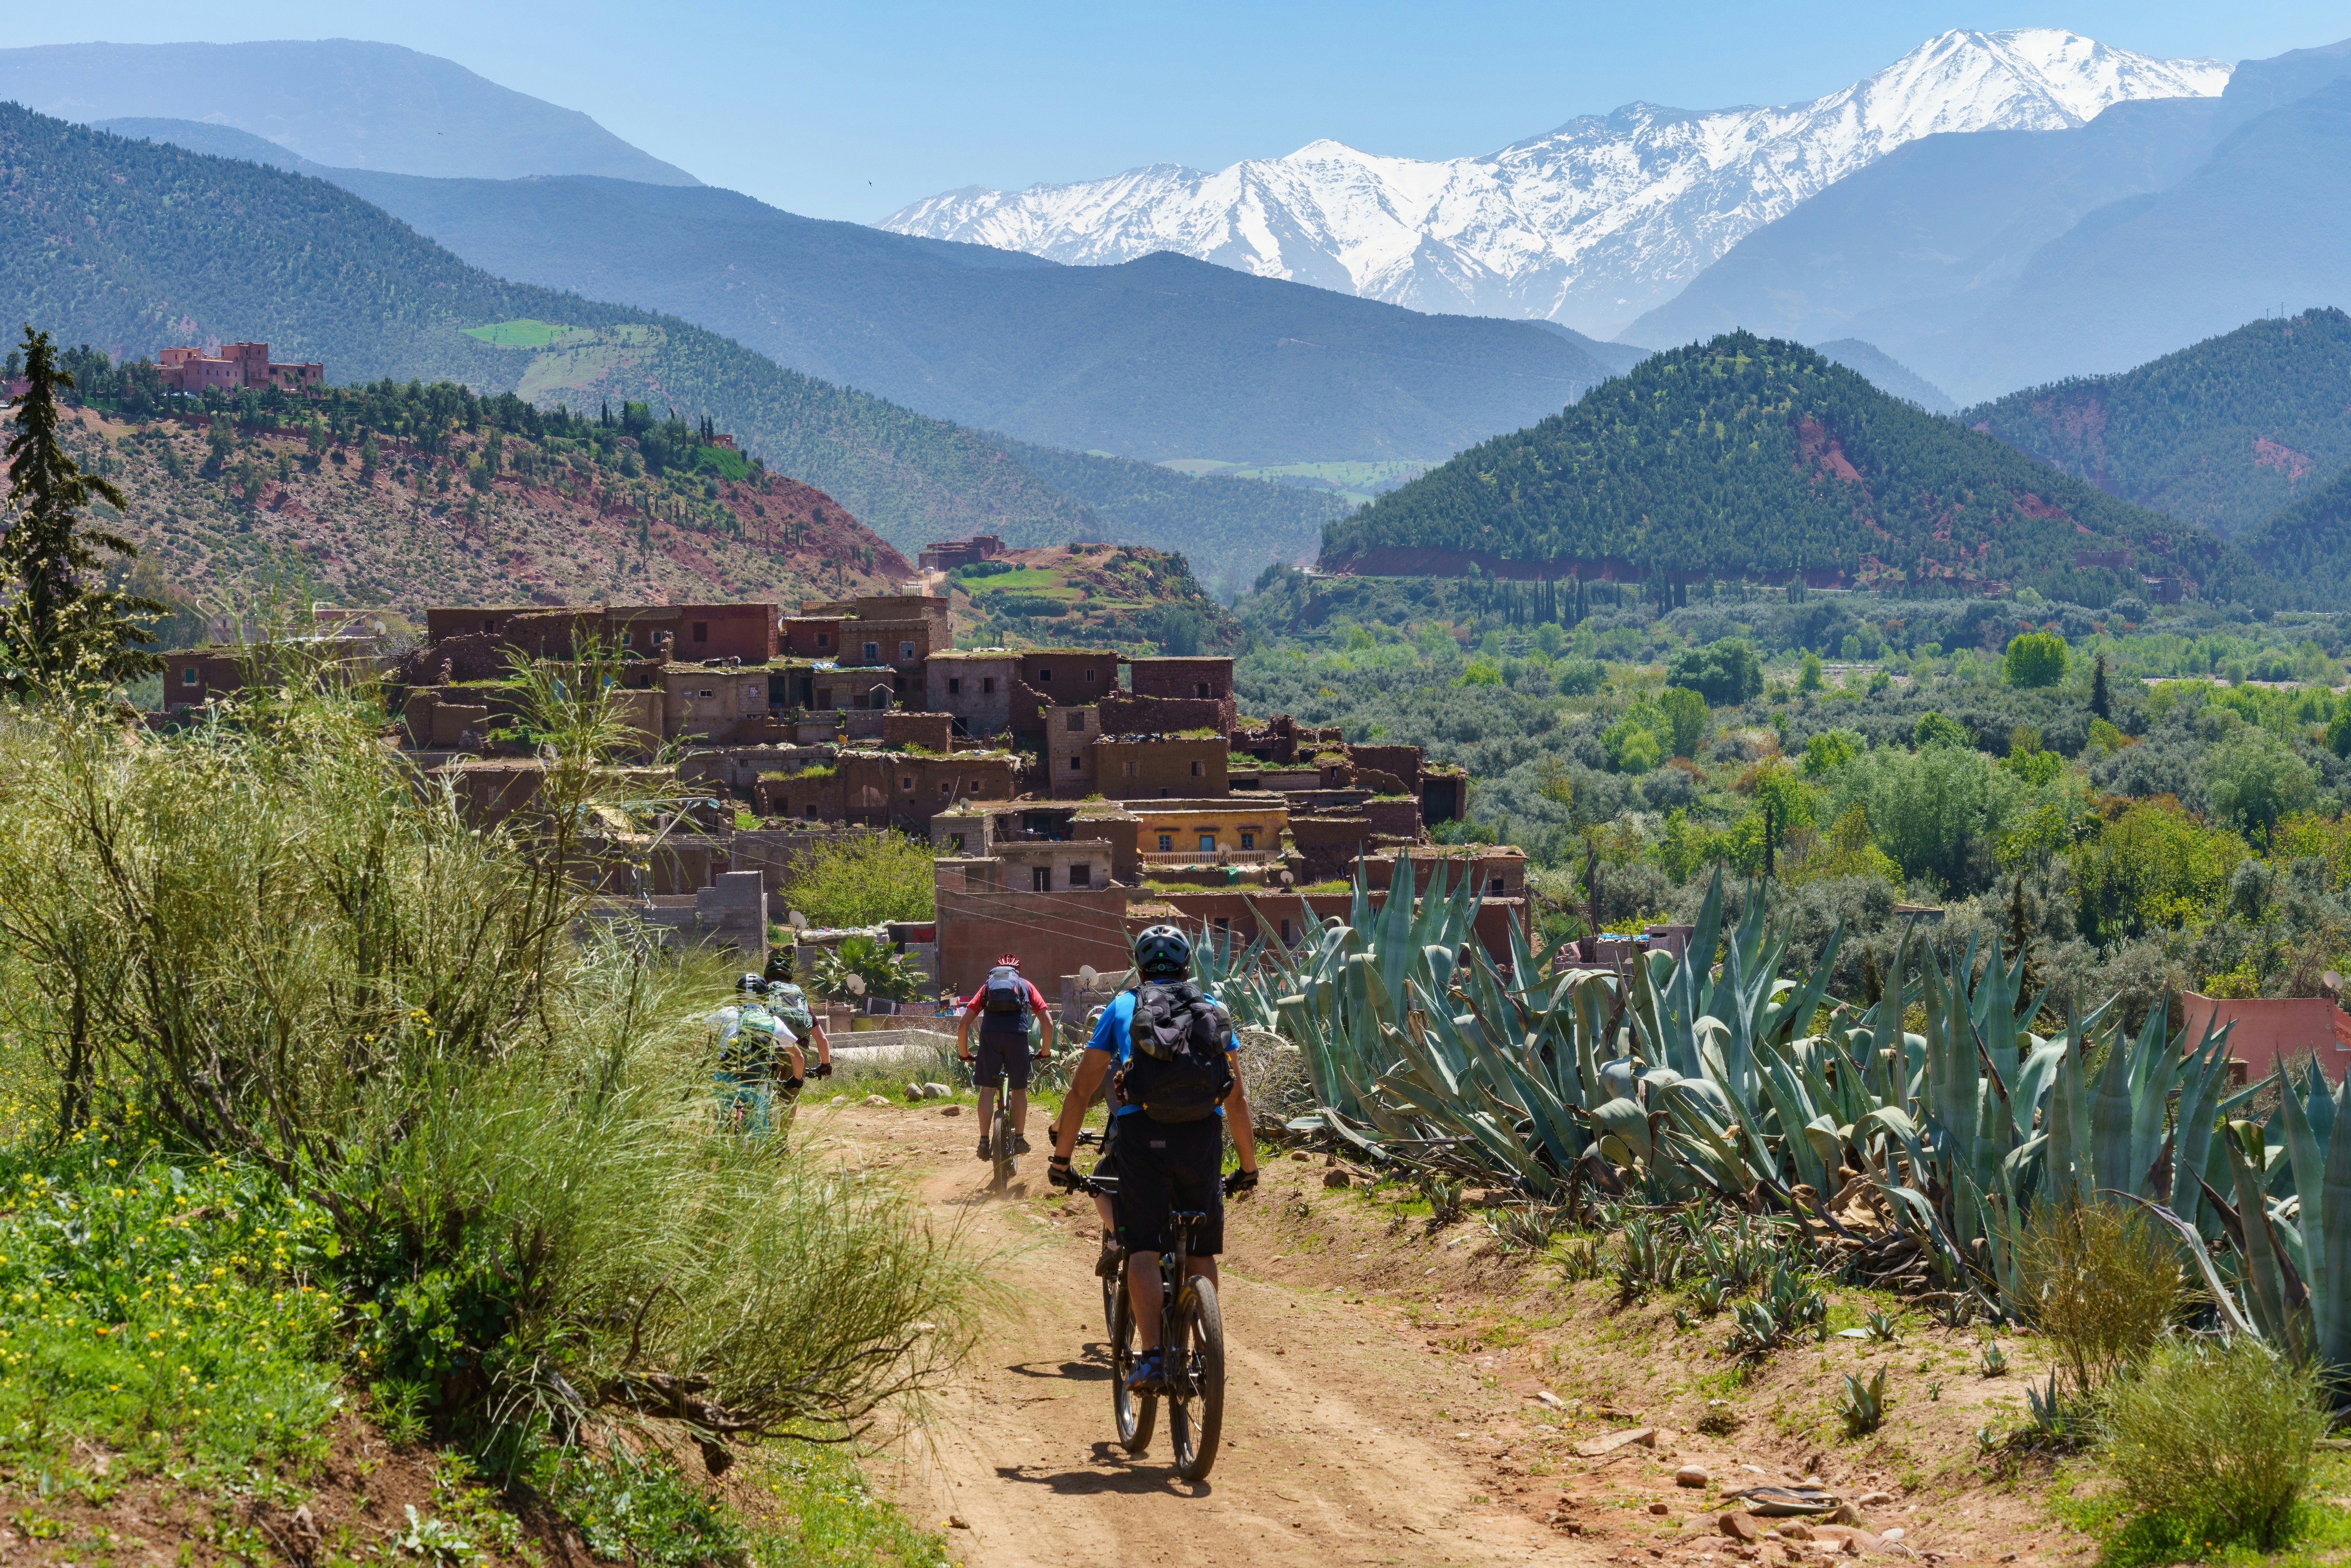 A group of cyclists pedal along a trail towards a traditional-looking village in the hills of the Atlas Mountains, Morocco.